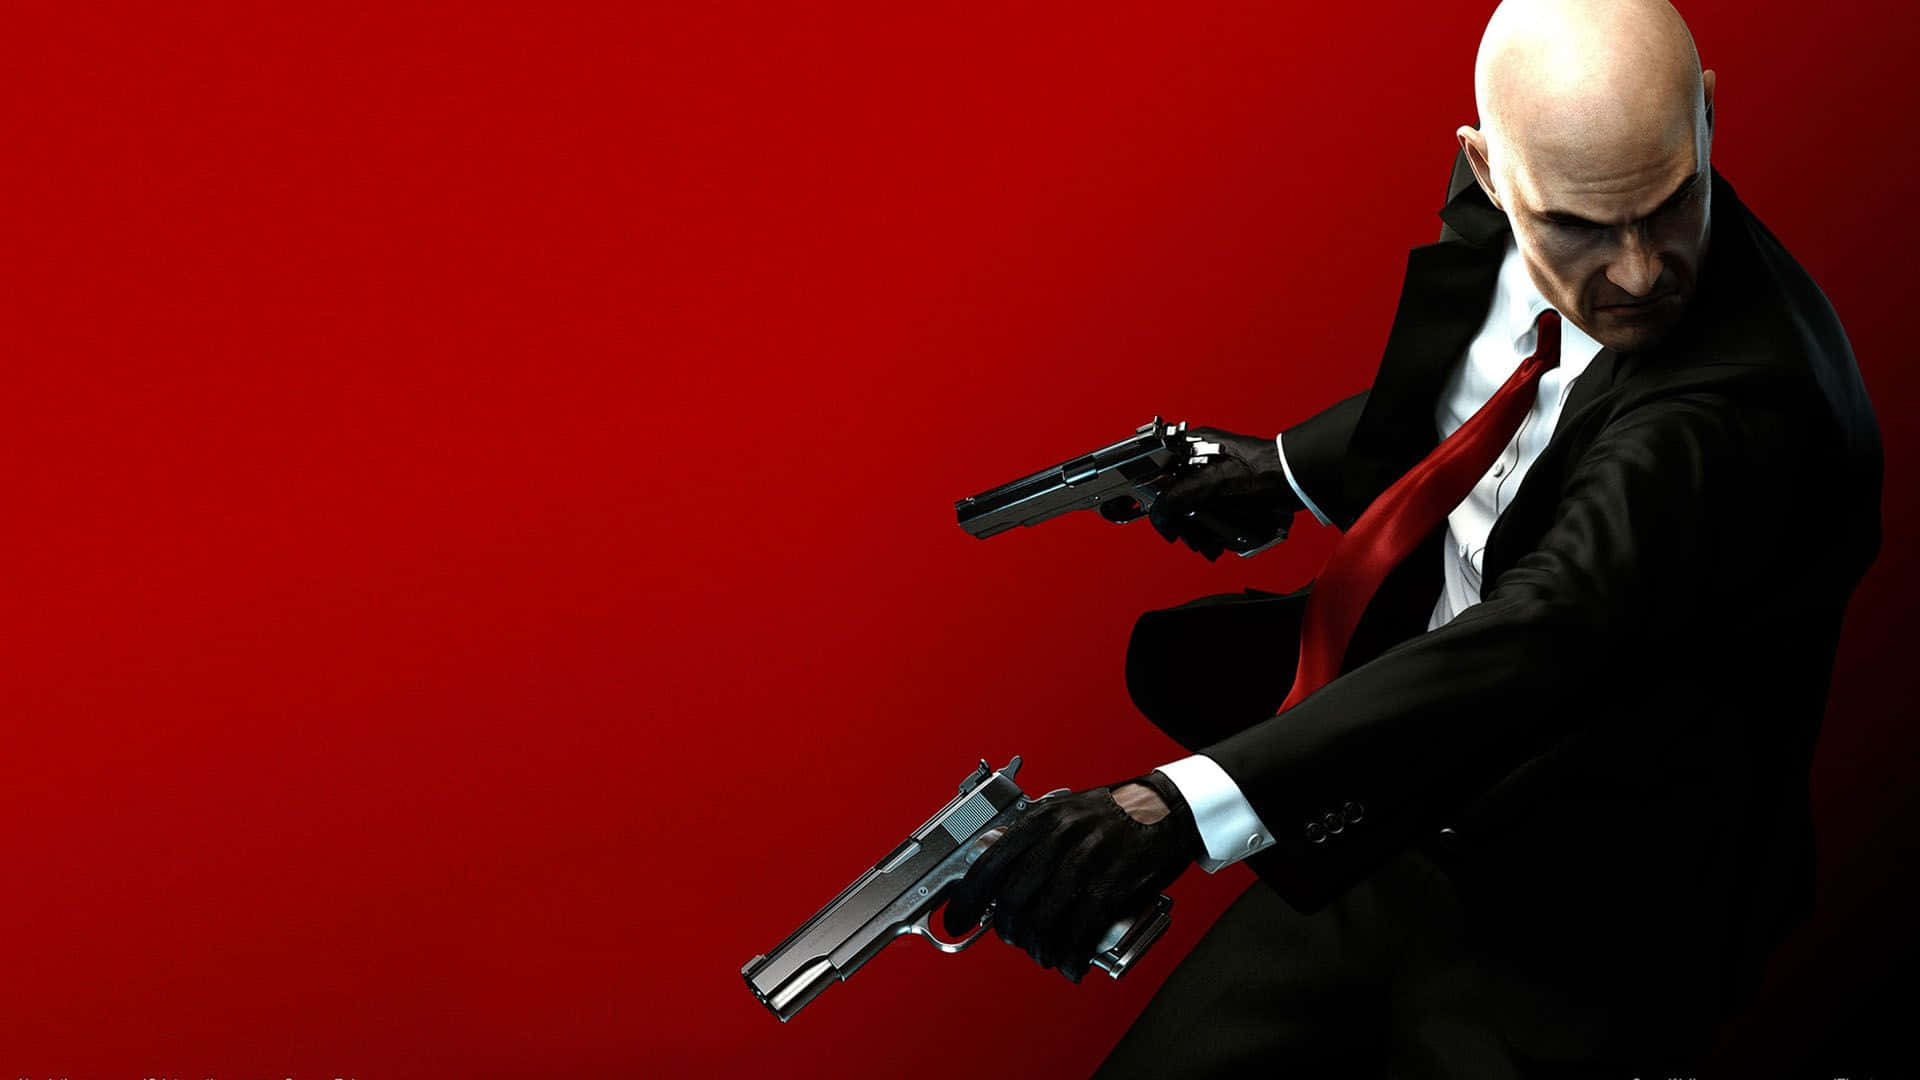 Agent 47 in action in the Hitman 2 video game